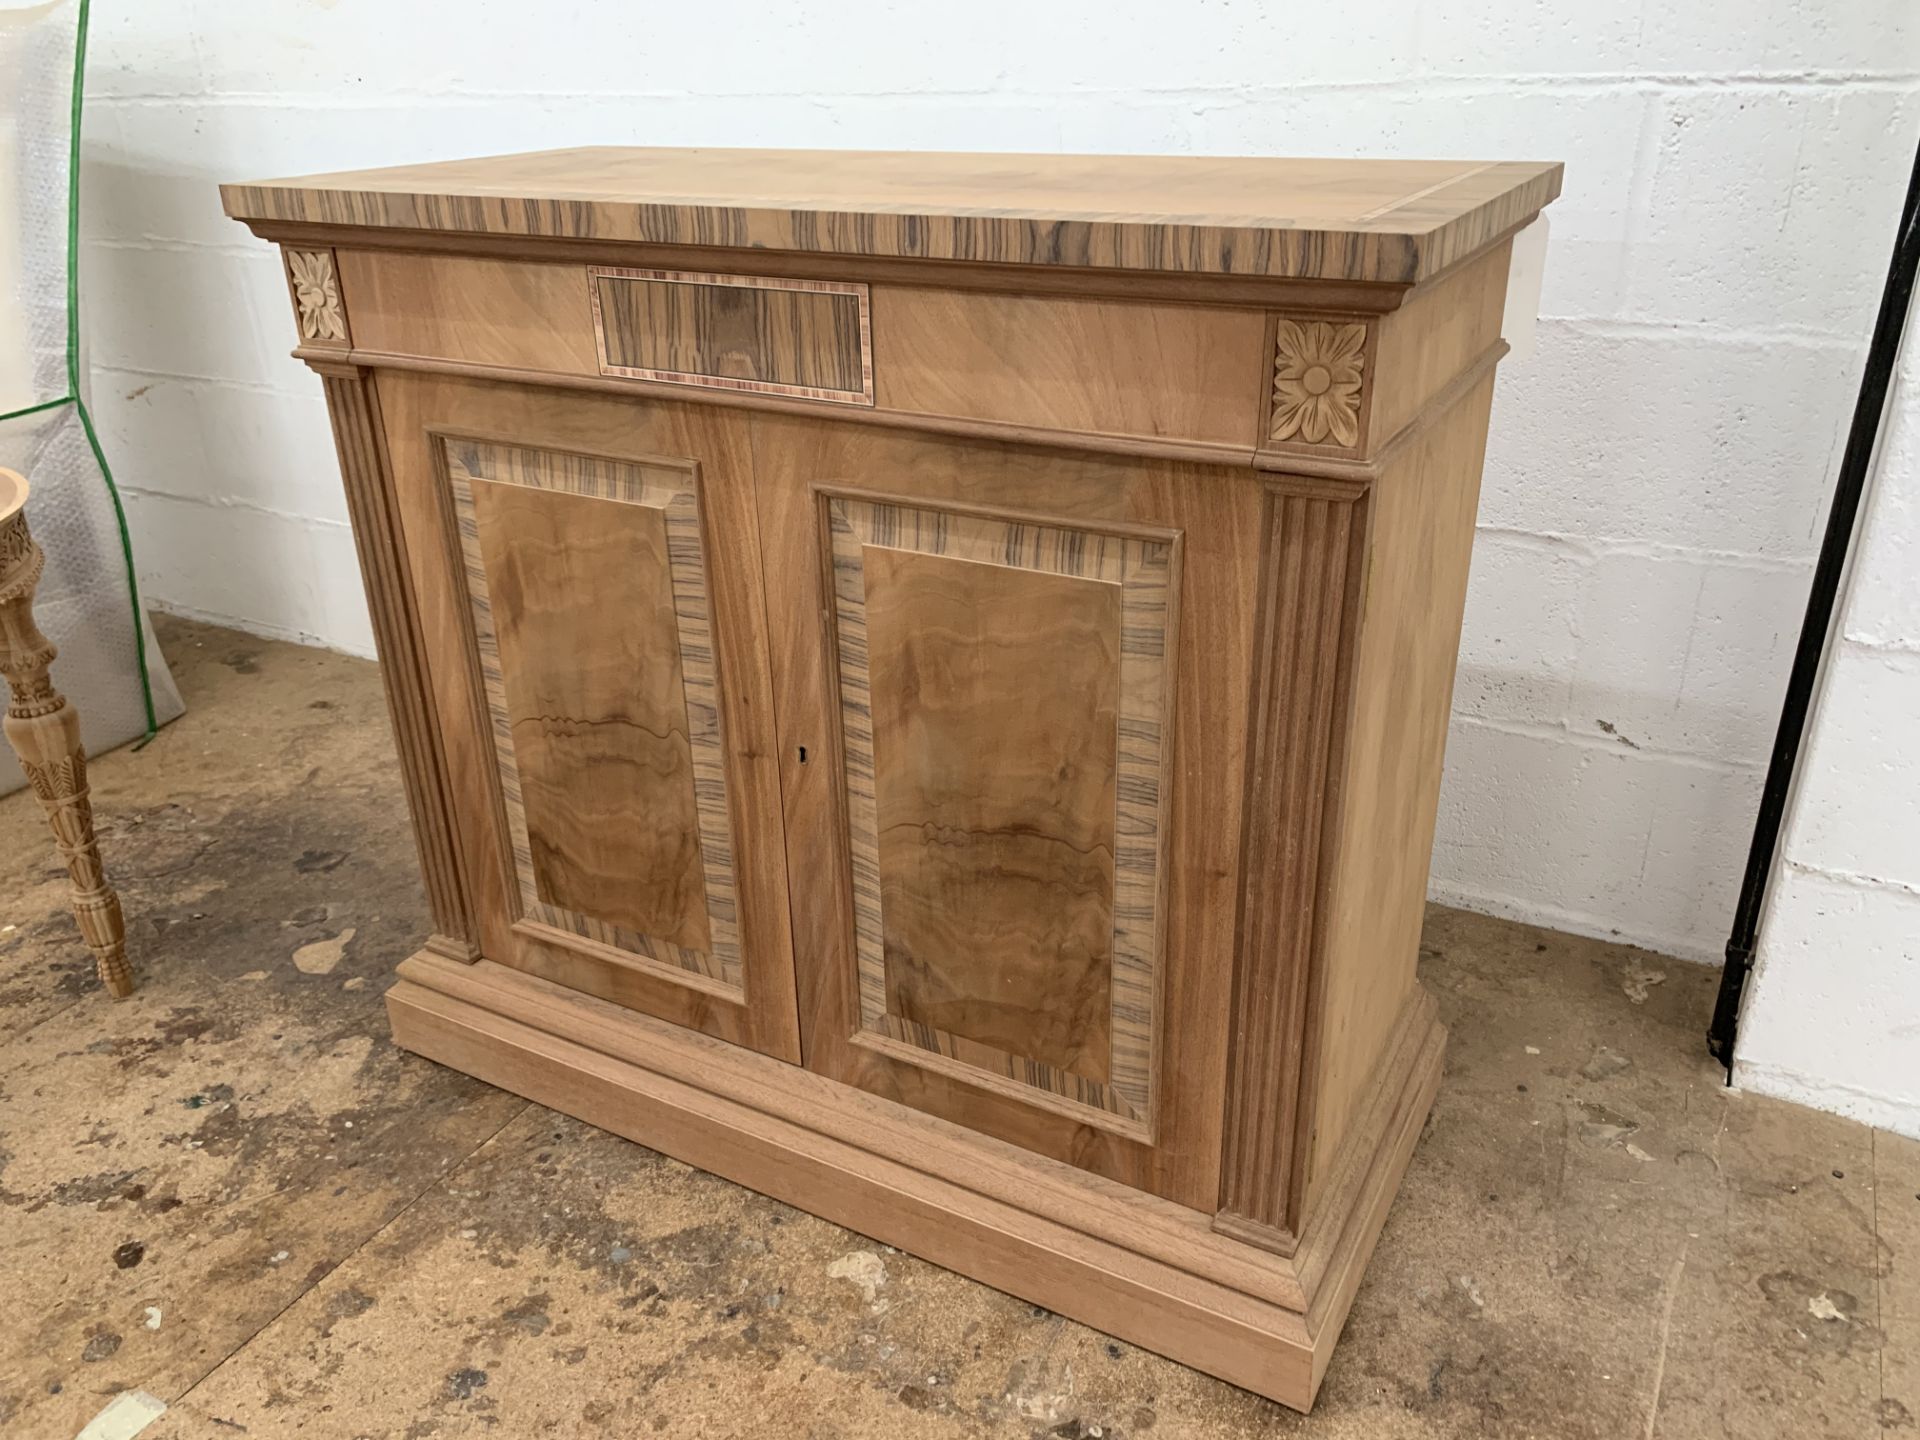 Small two-door Sideboard, in Mahogany finish, from the Corinthian range, requires finishing/ - Image 2 of 5